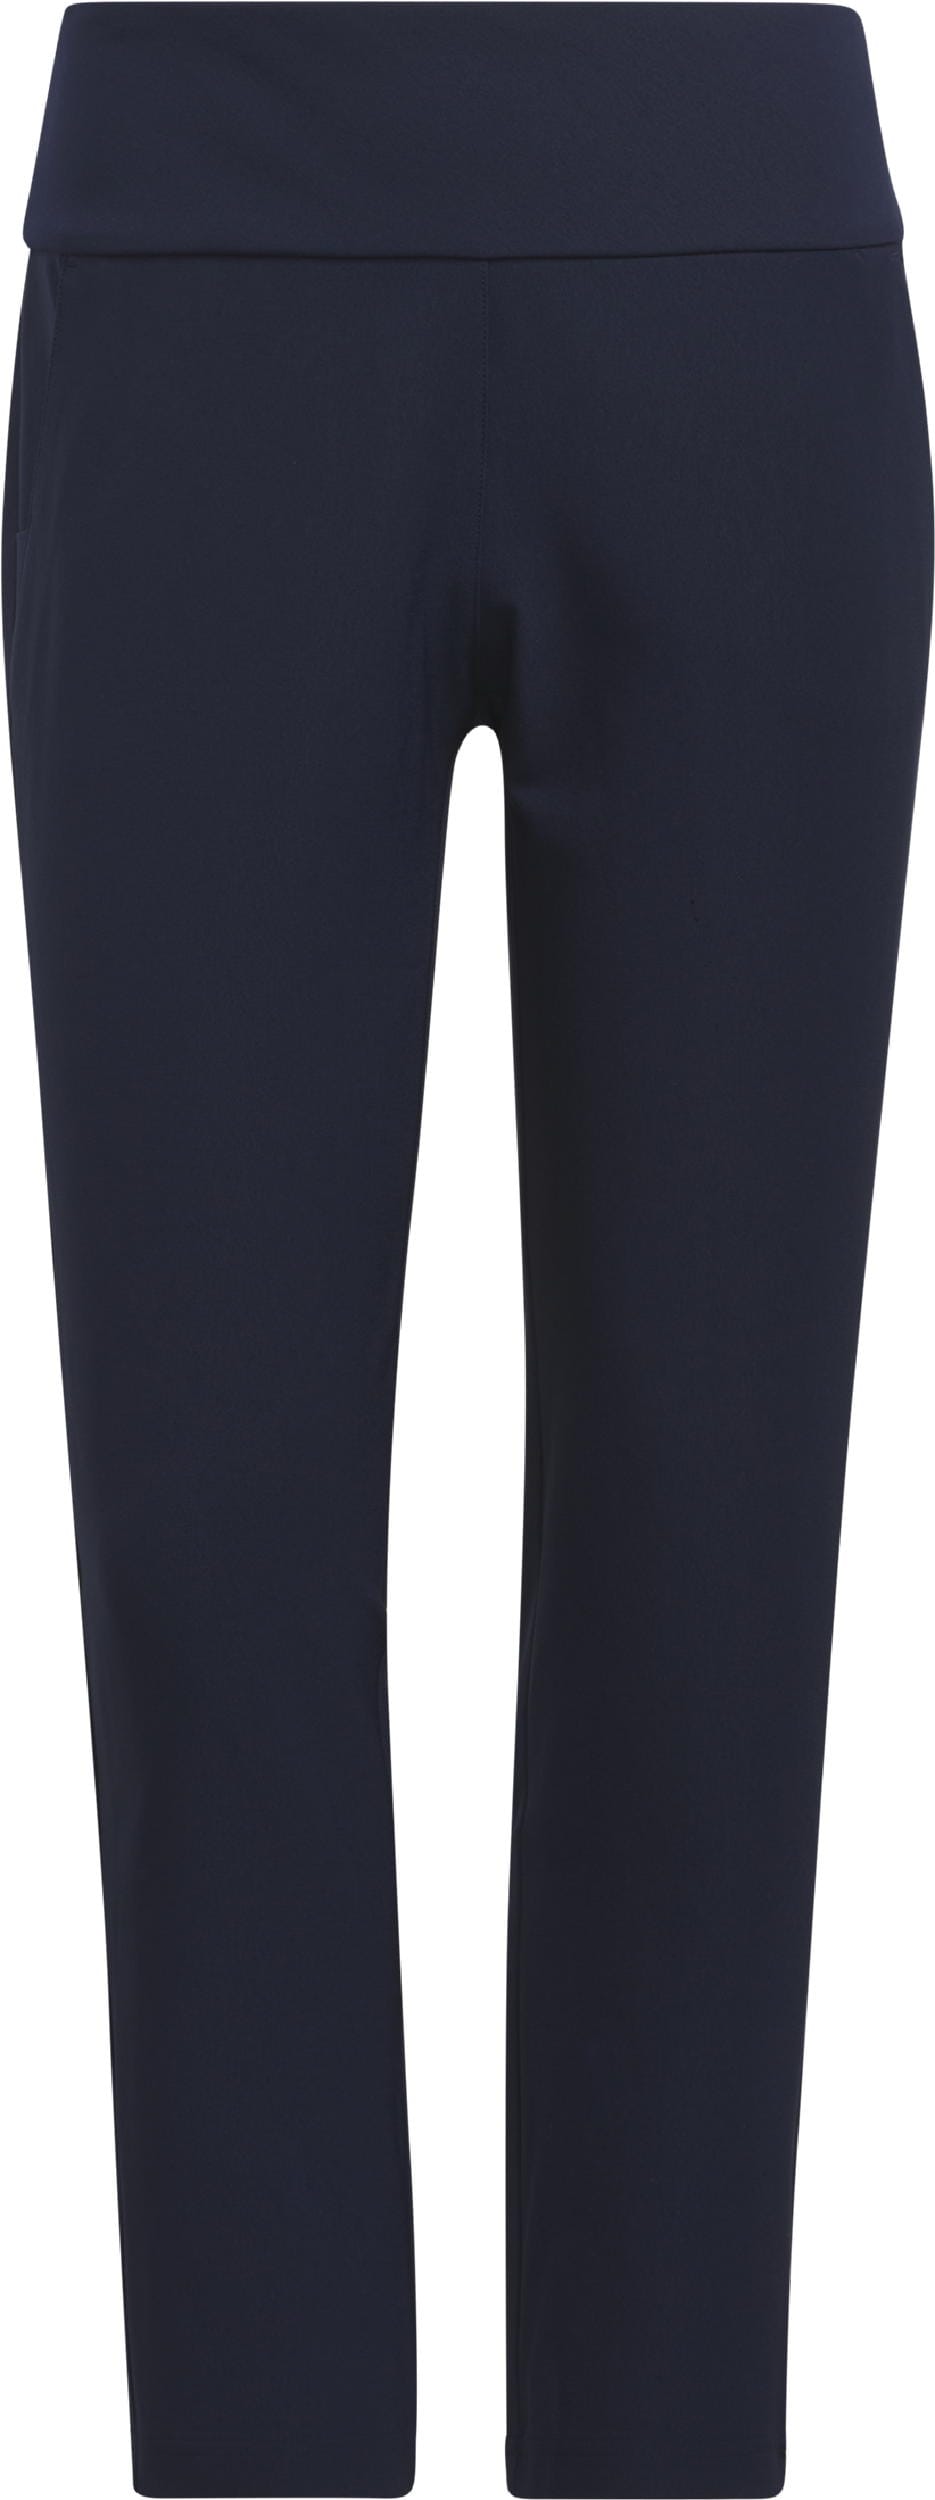 adidas Pullon Ankle Golfhose, navy